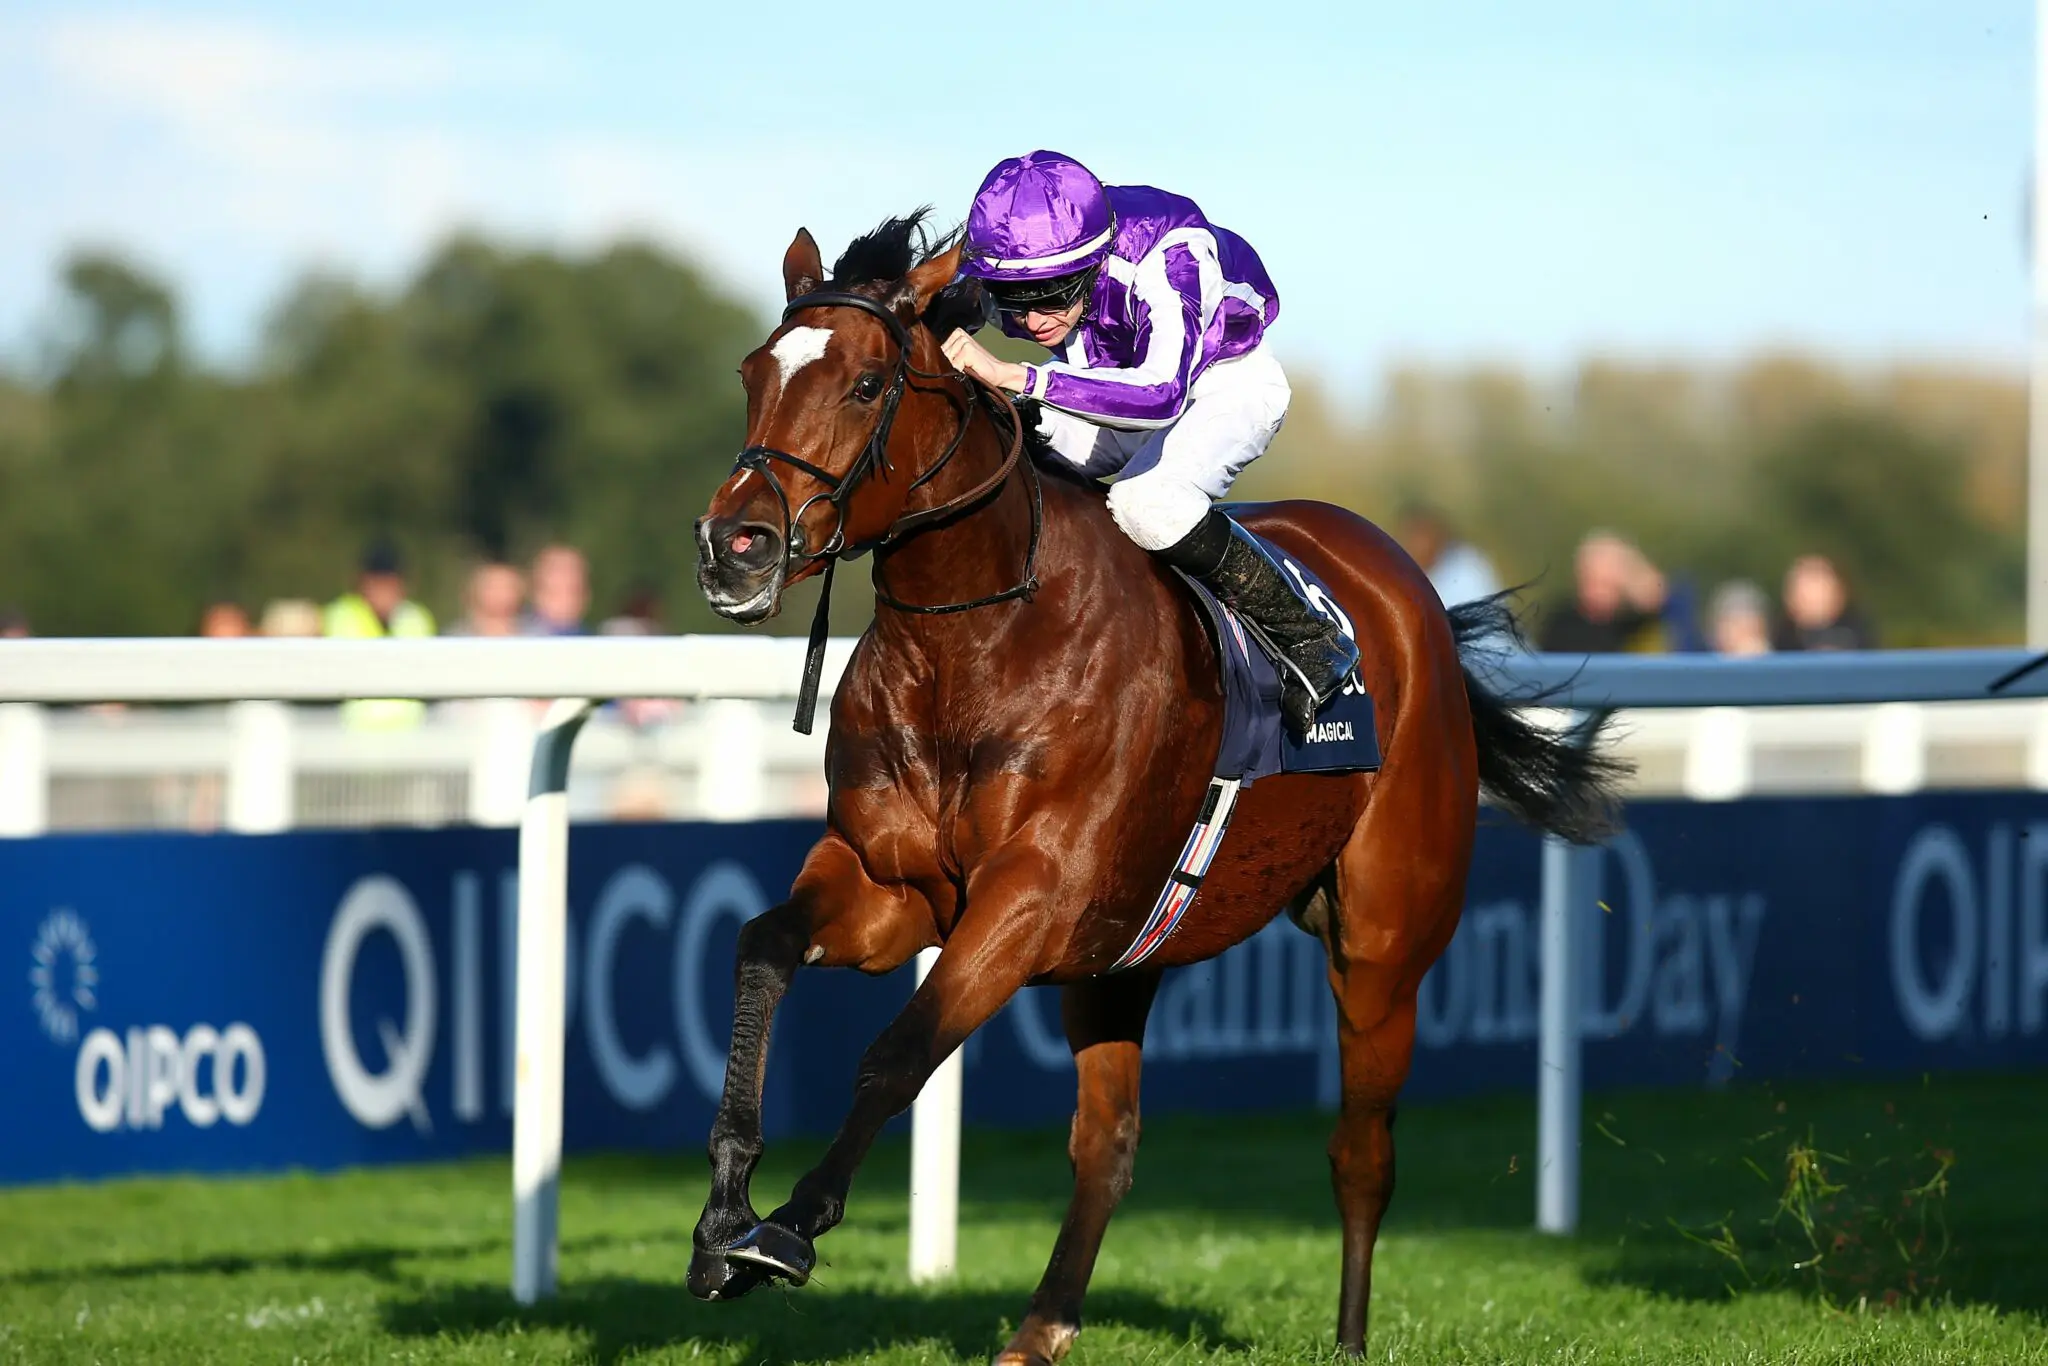 Image of jockey in a purple jacket riding a horse at Ascot